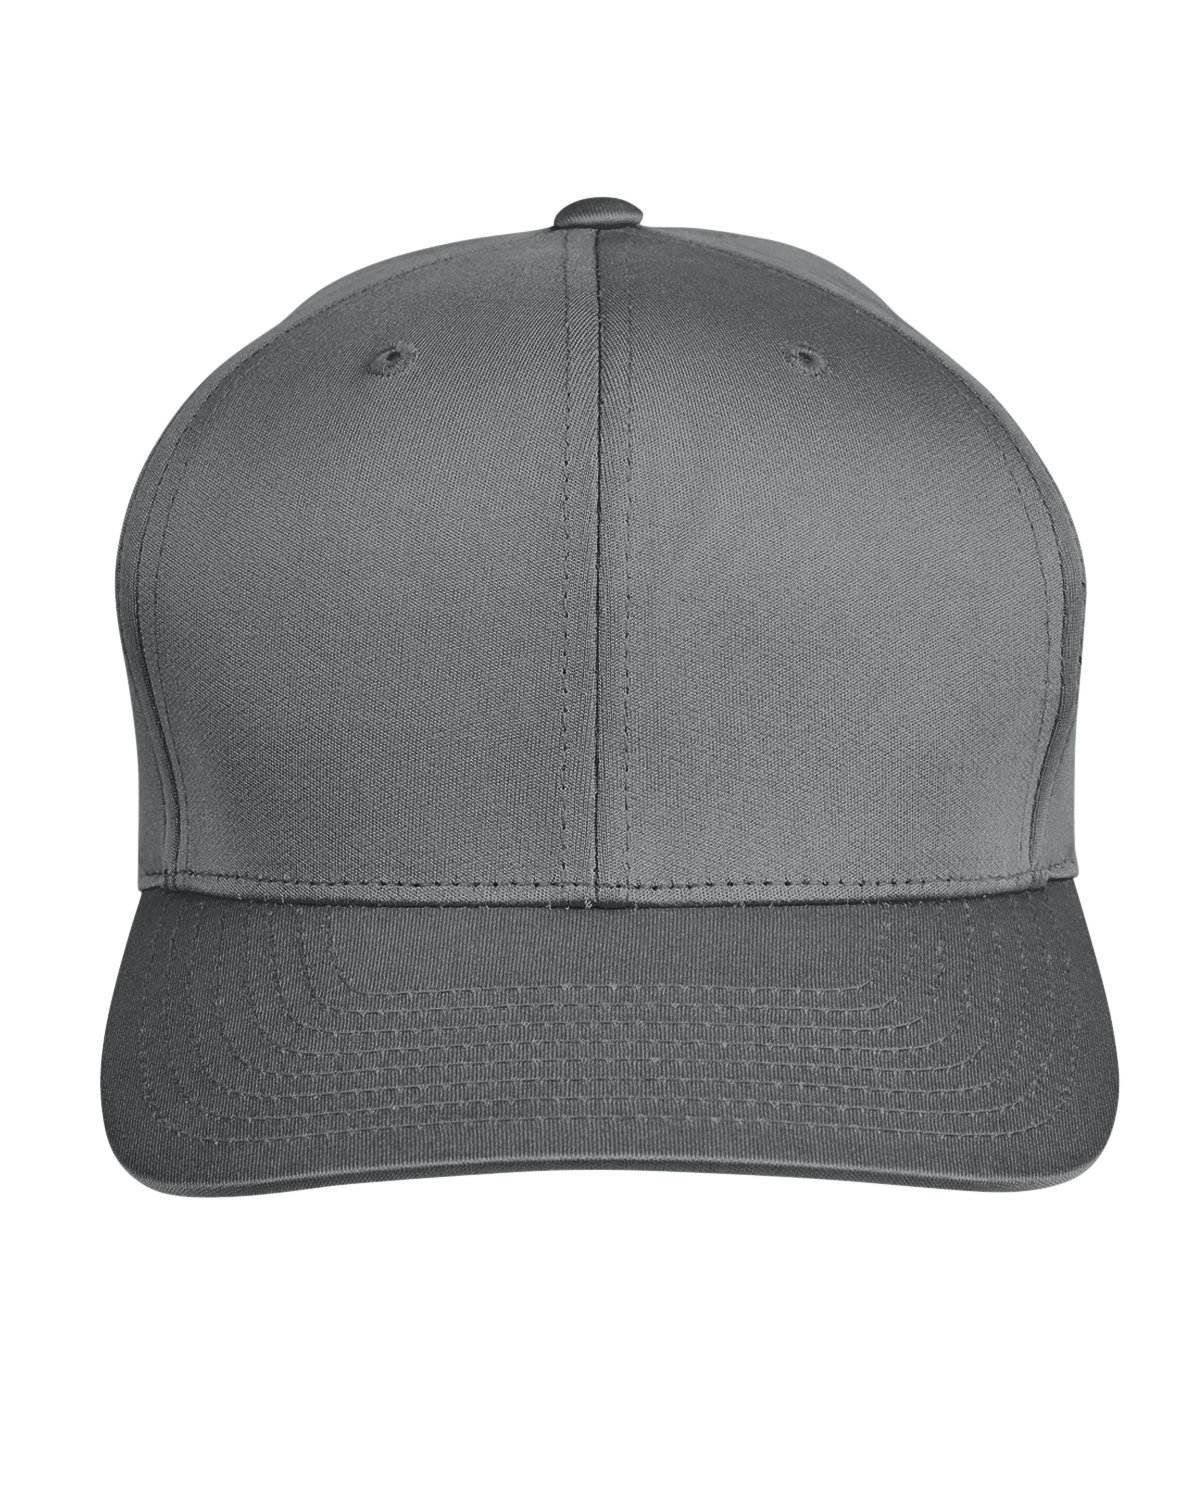 Team 365 by Yupoong® Adult Zone Performance Cap SPORT GRAPHITE 